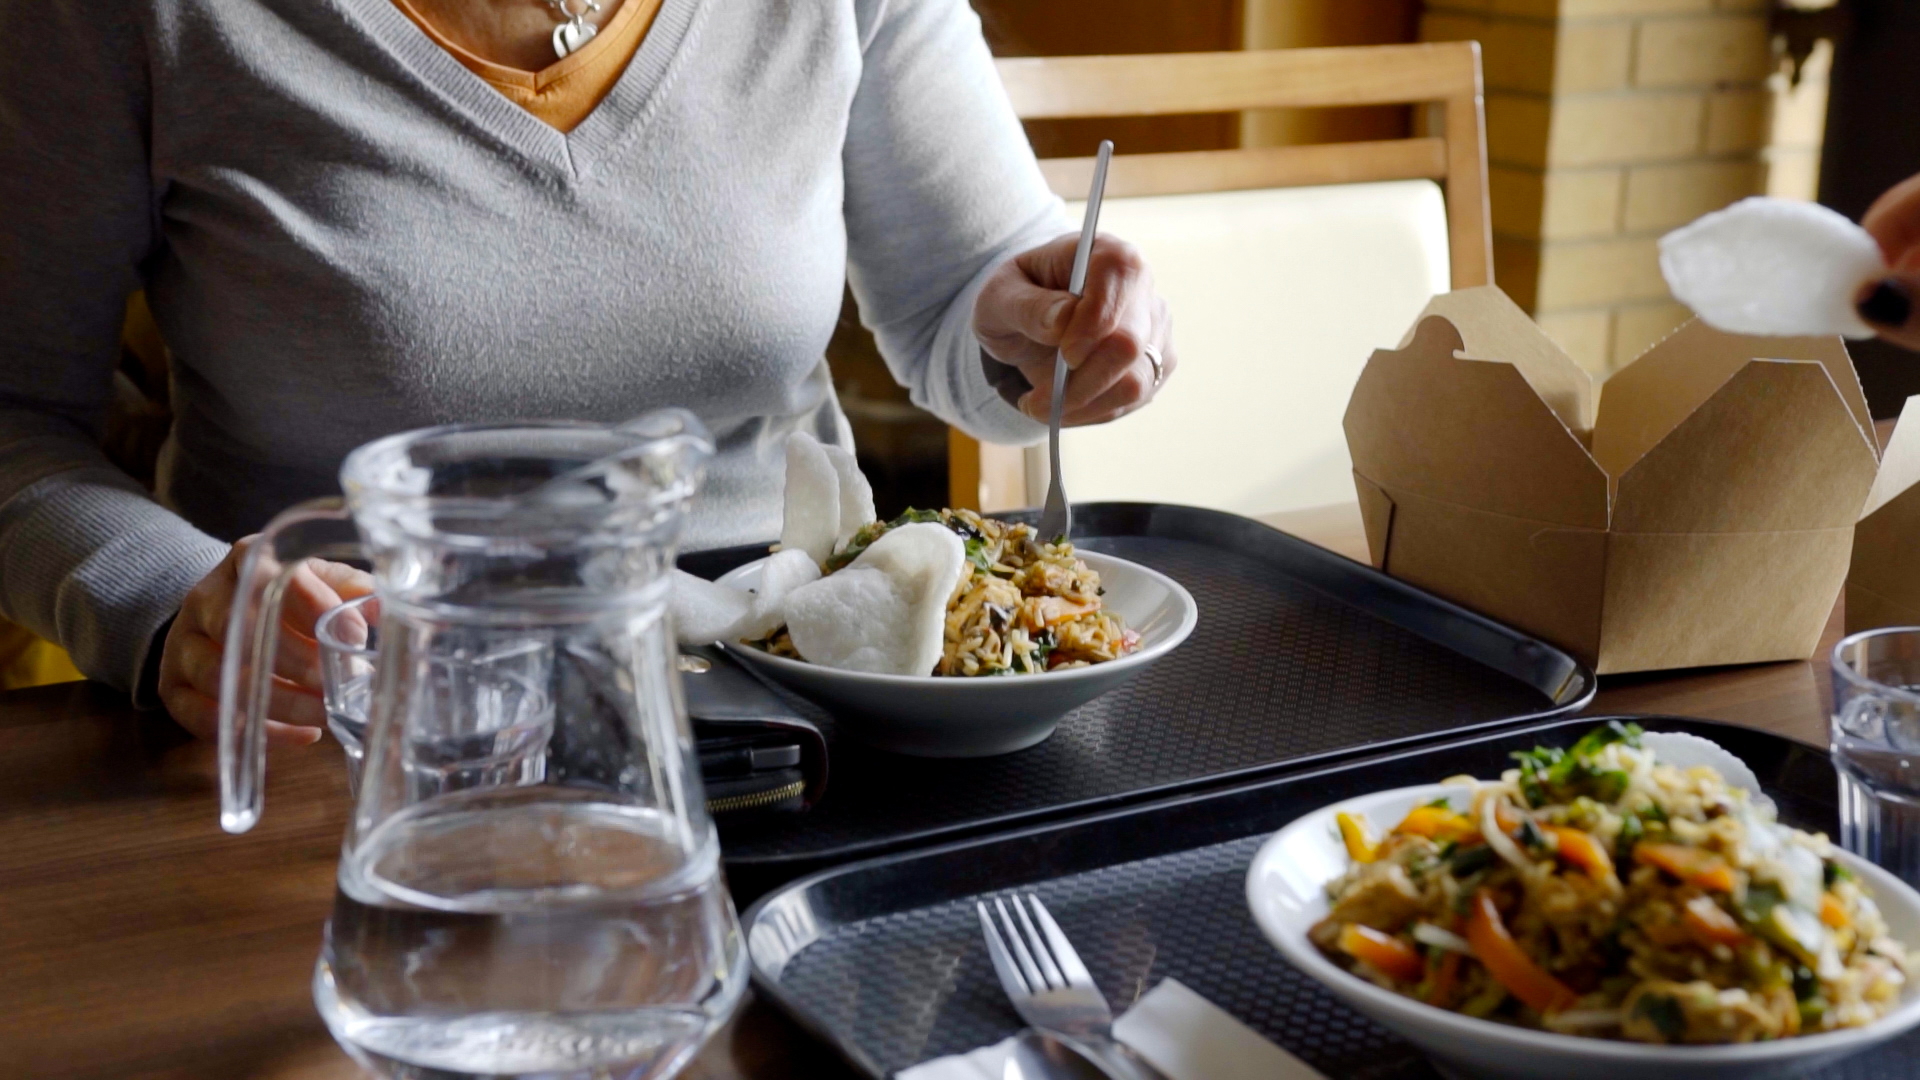 Two people dining in Rutherford Dining Hall, enjoying stir fry noodles from the Wok Bar